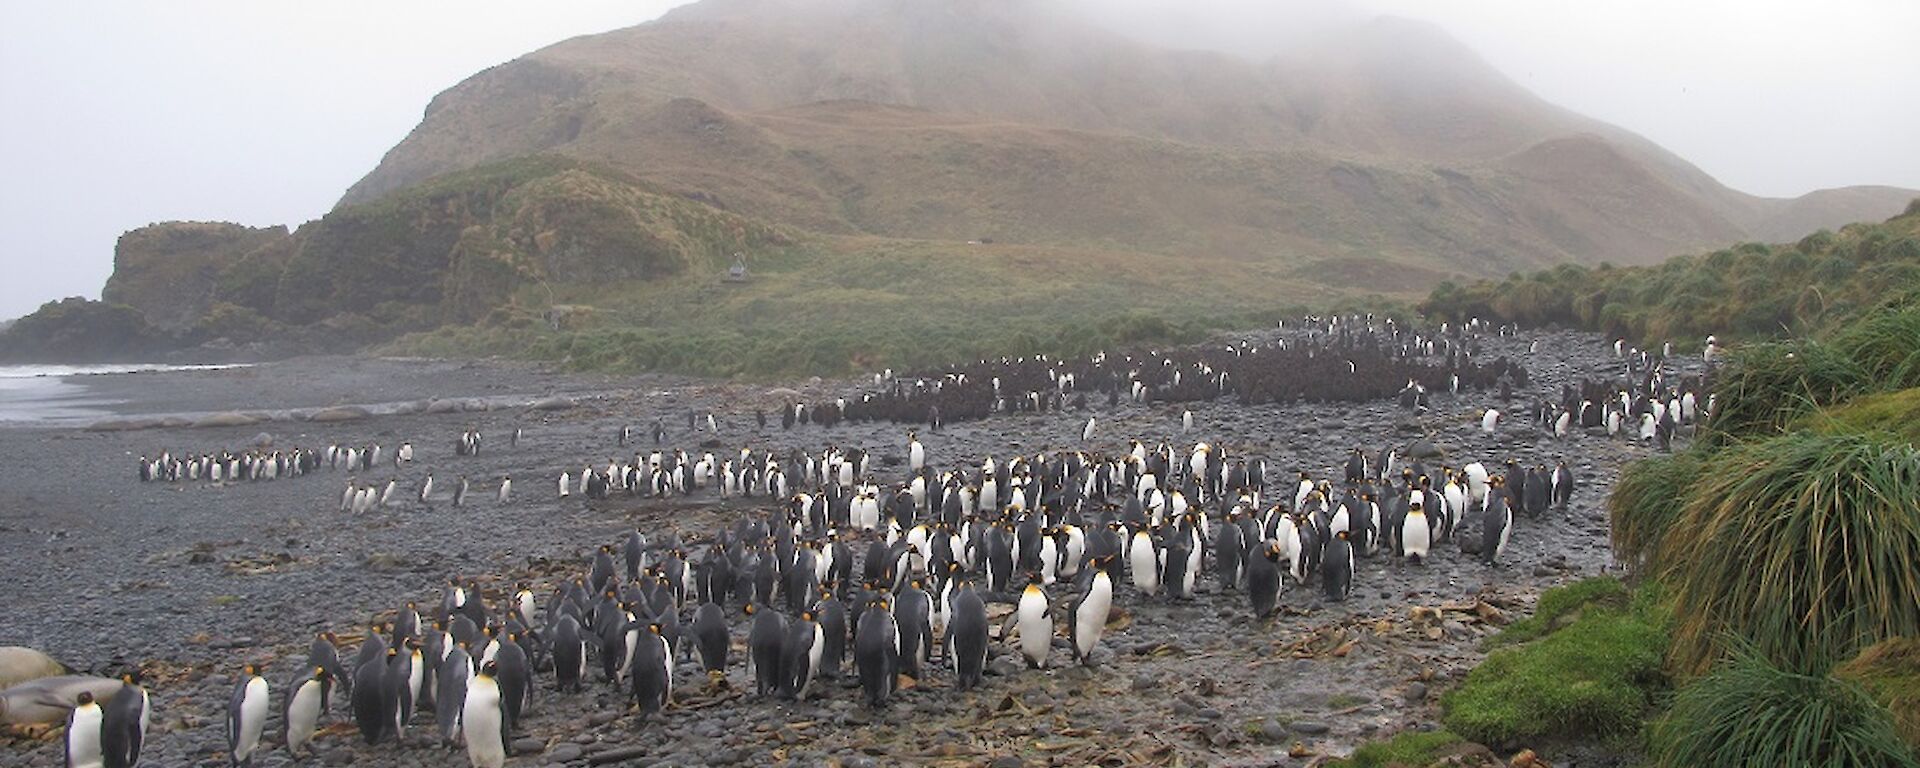 The king penguin colony at Green Gorge